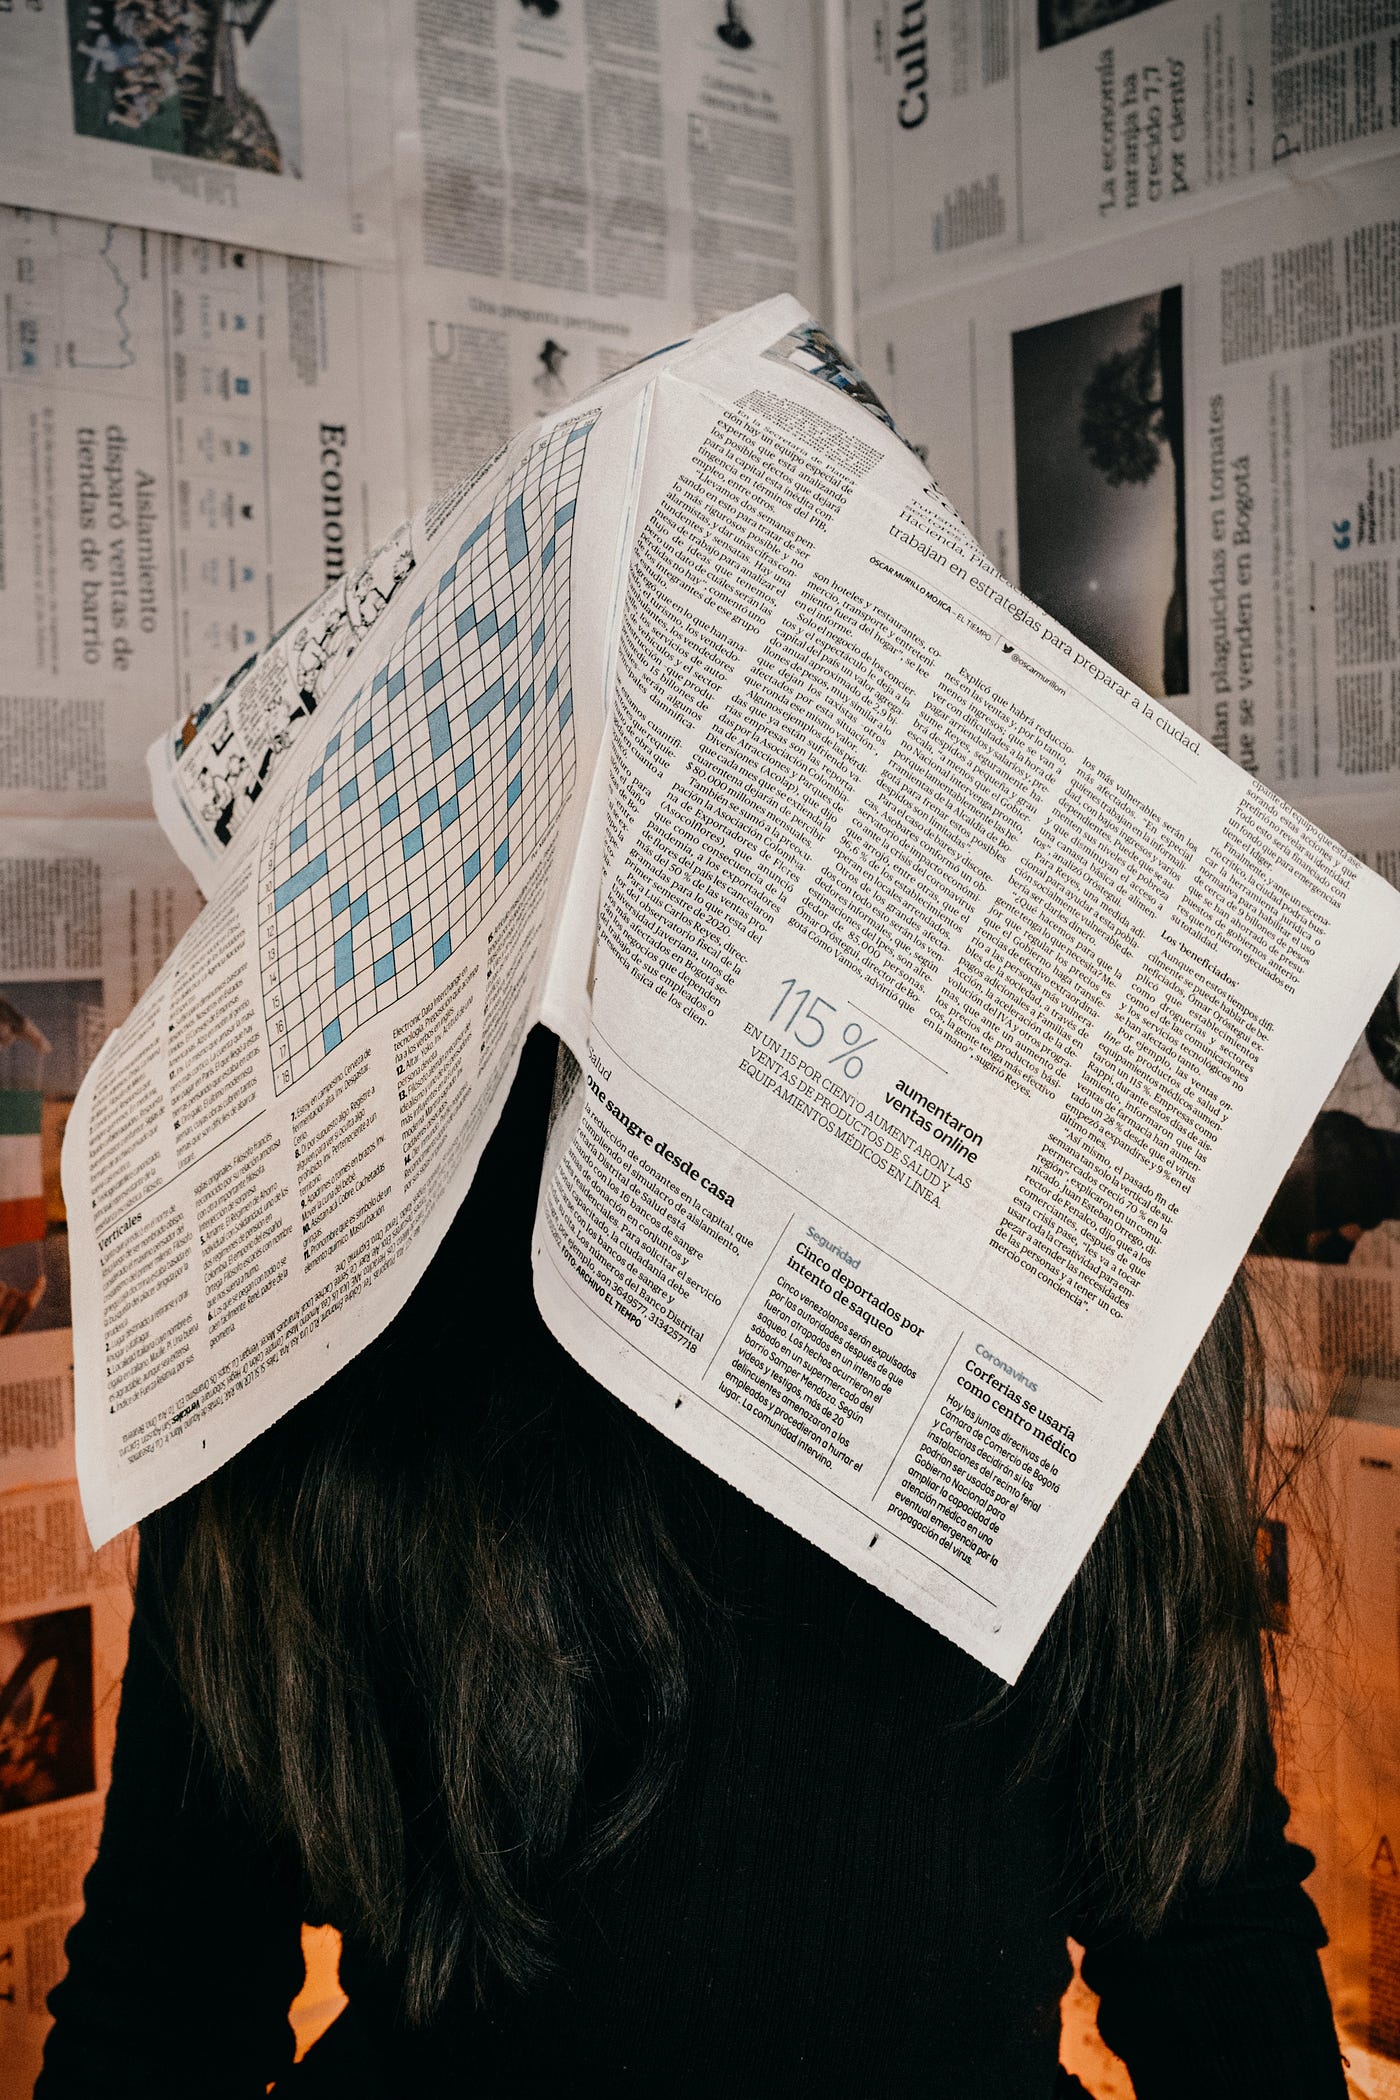 A person with a newspaper on her head.